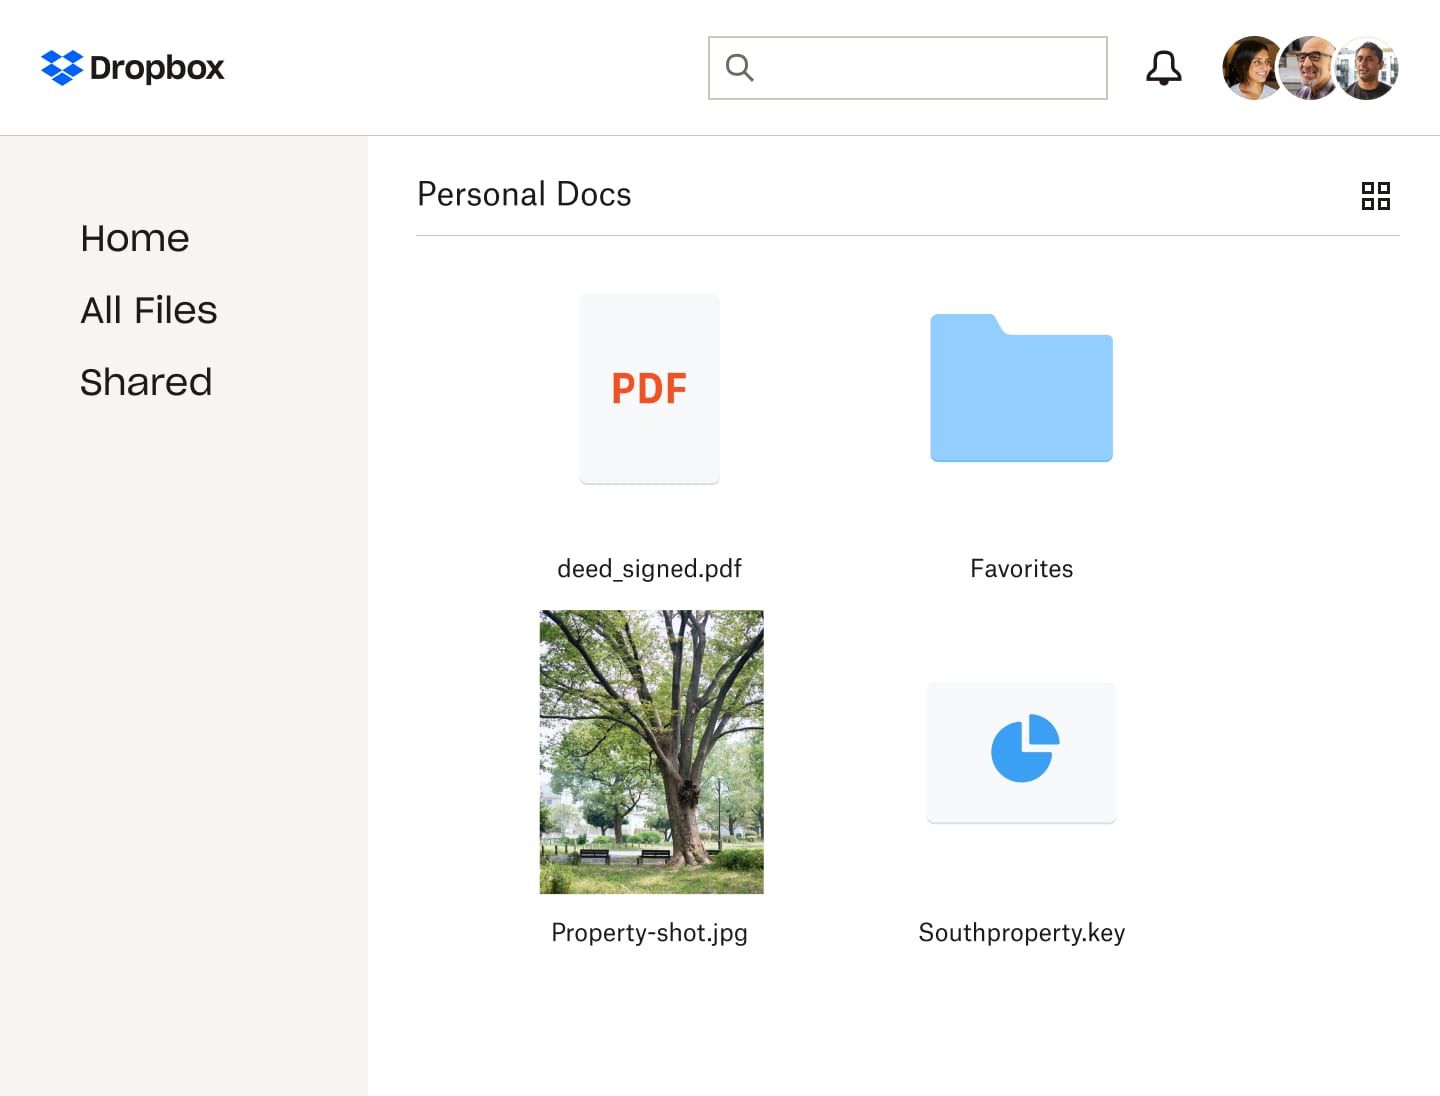 Photos and various files for a property deed in a shared Dropbox folder